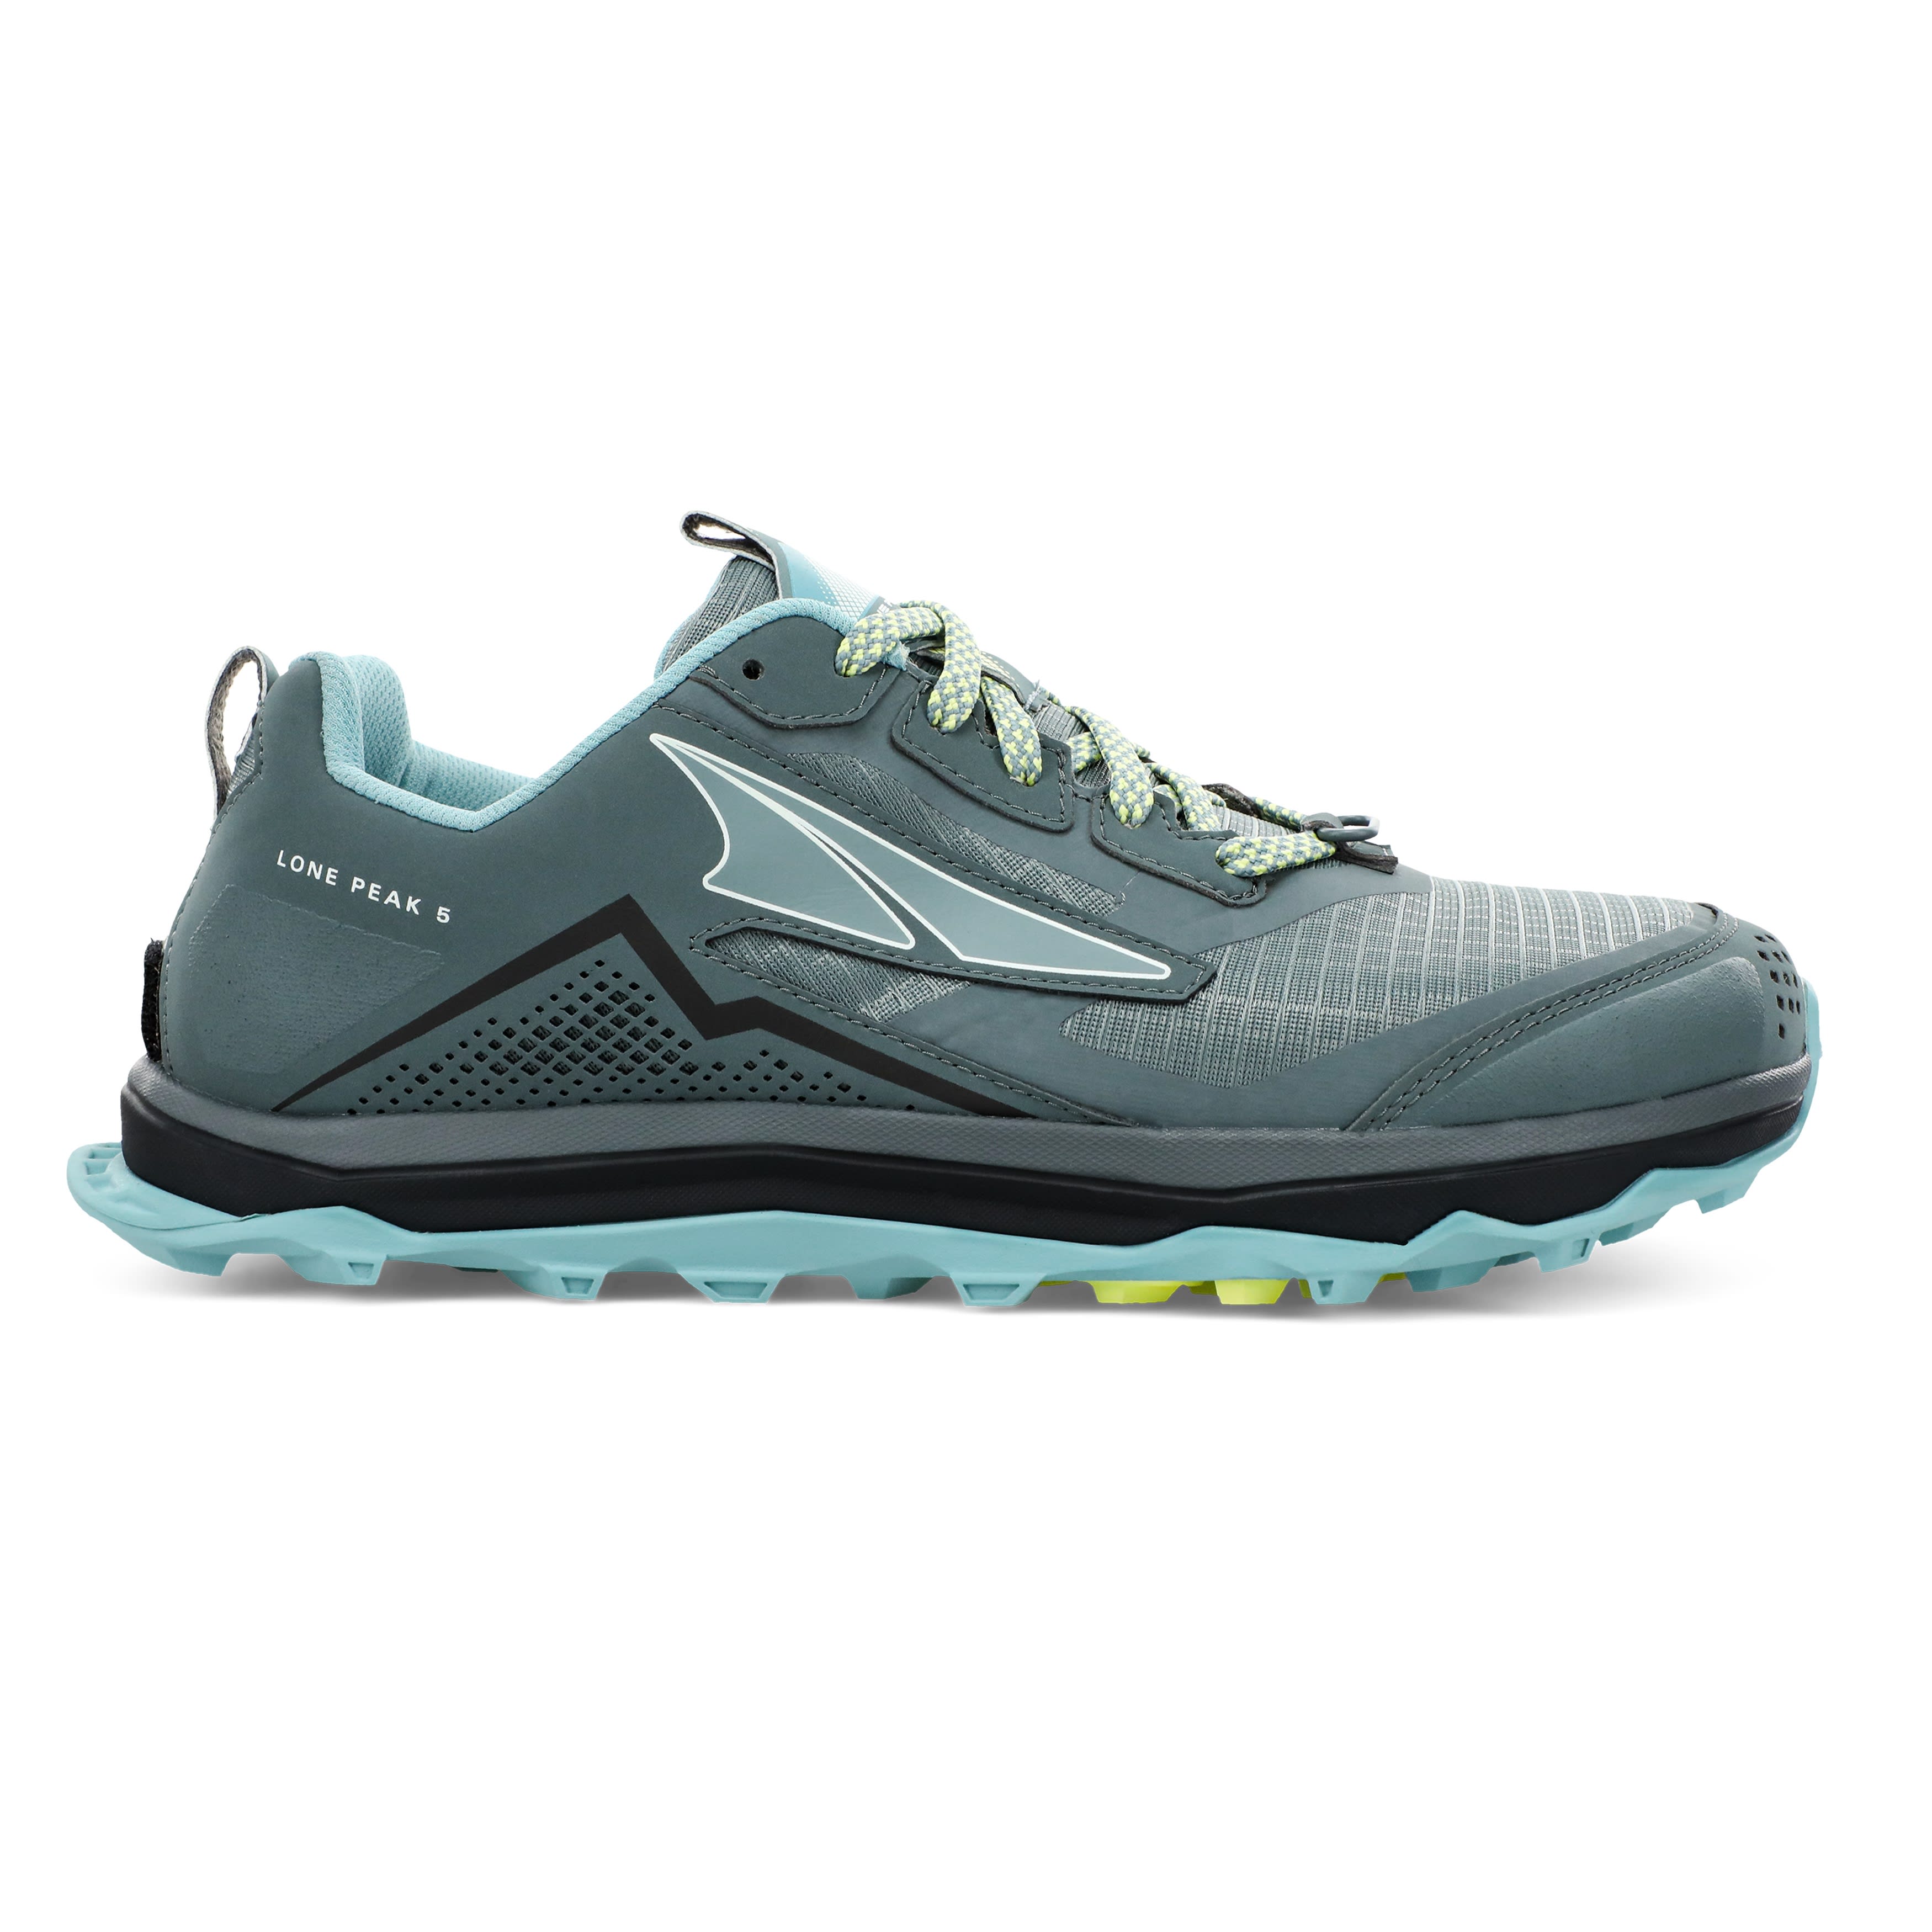 Buy Altra Women's Lone Peak 5 from Outnorth